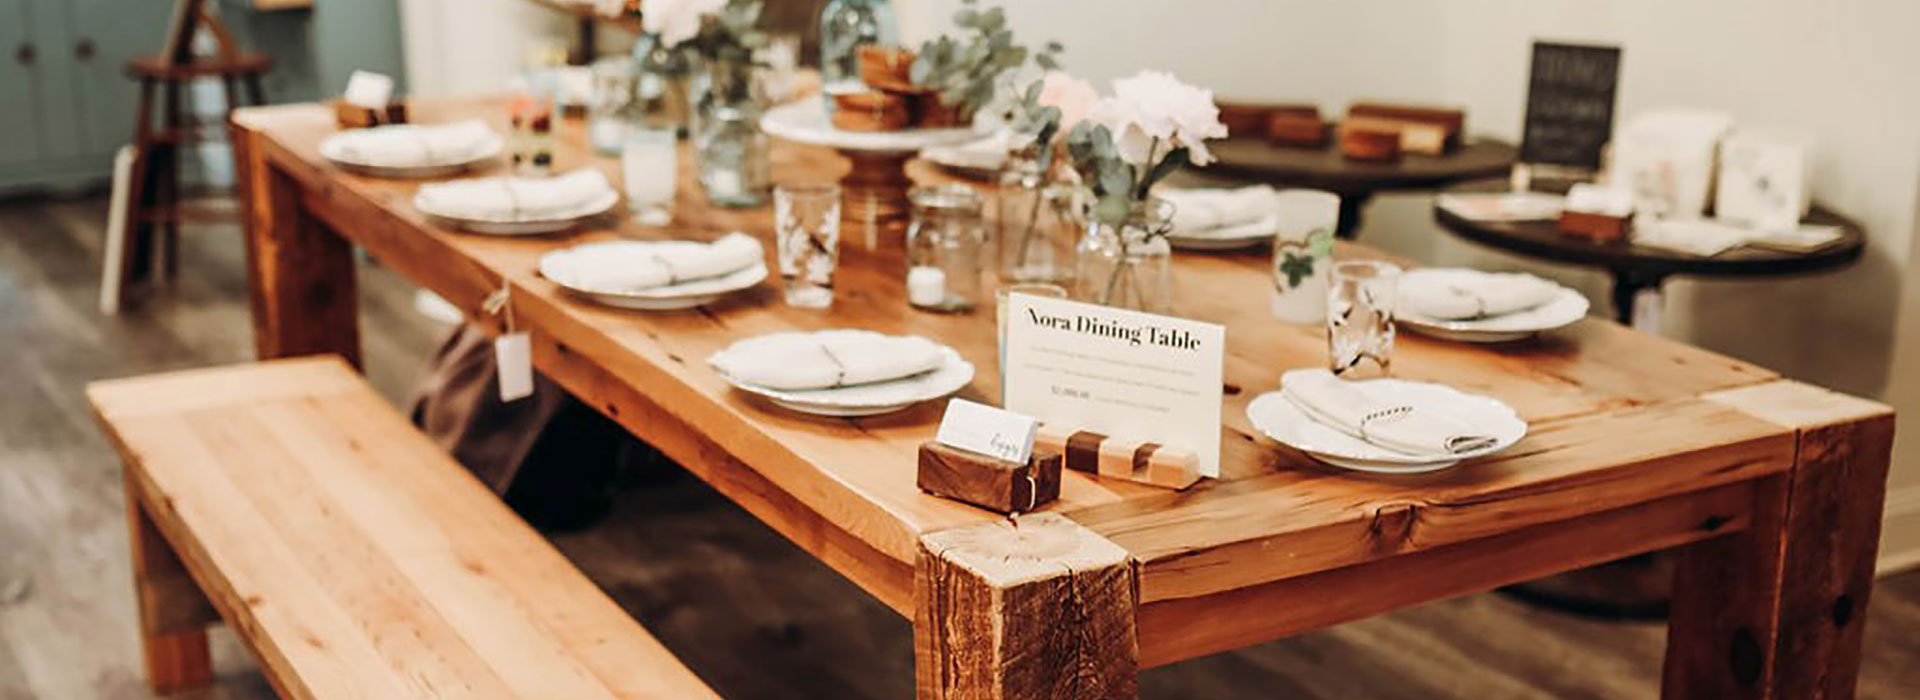 The table and bench, made from a wall stud from another renovation, were crafted by Tom. Photo by Erin Almy Photography